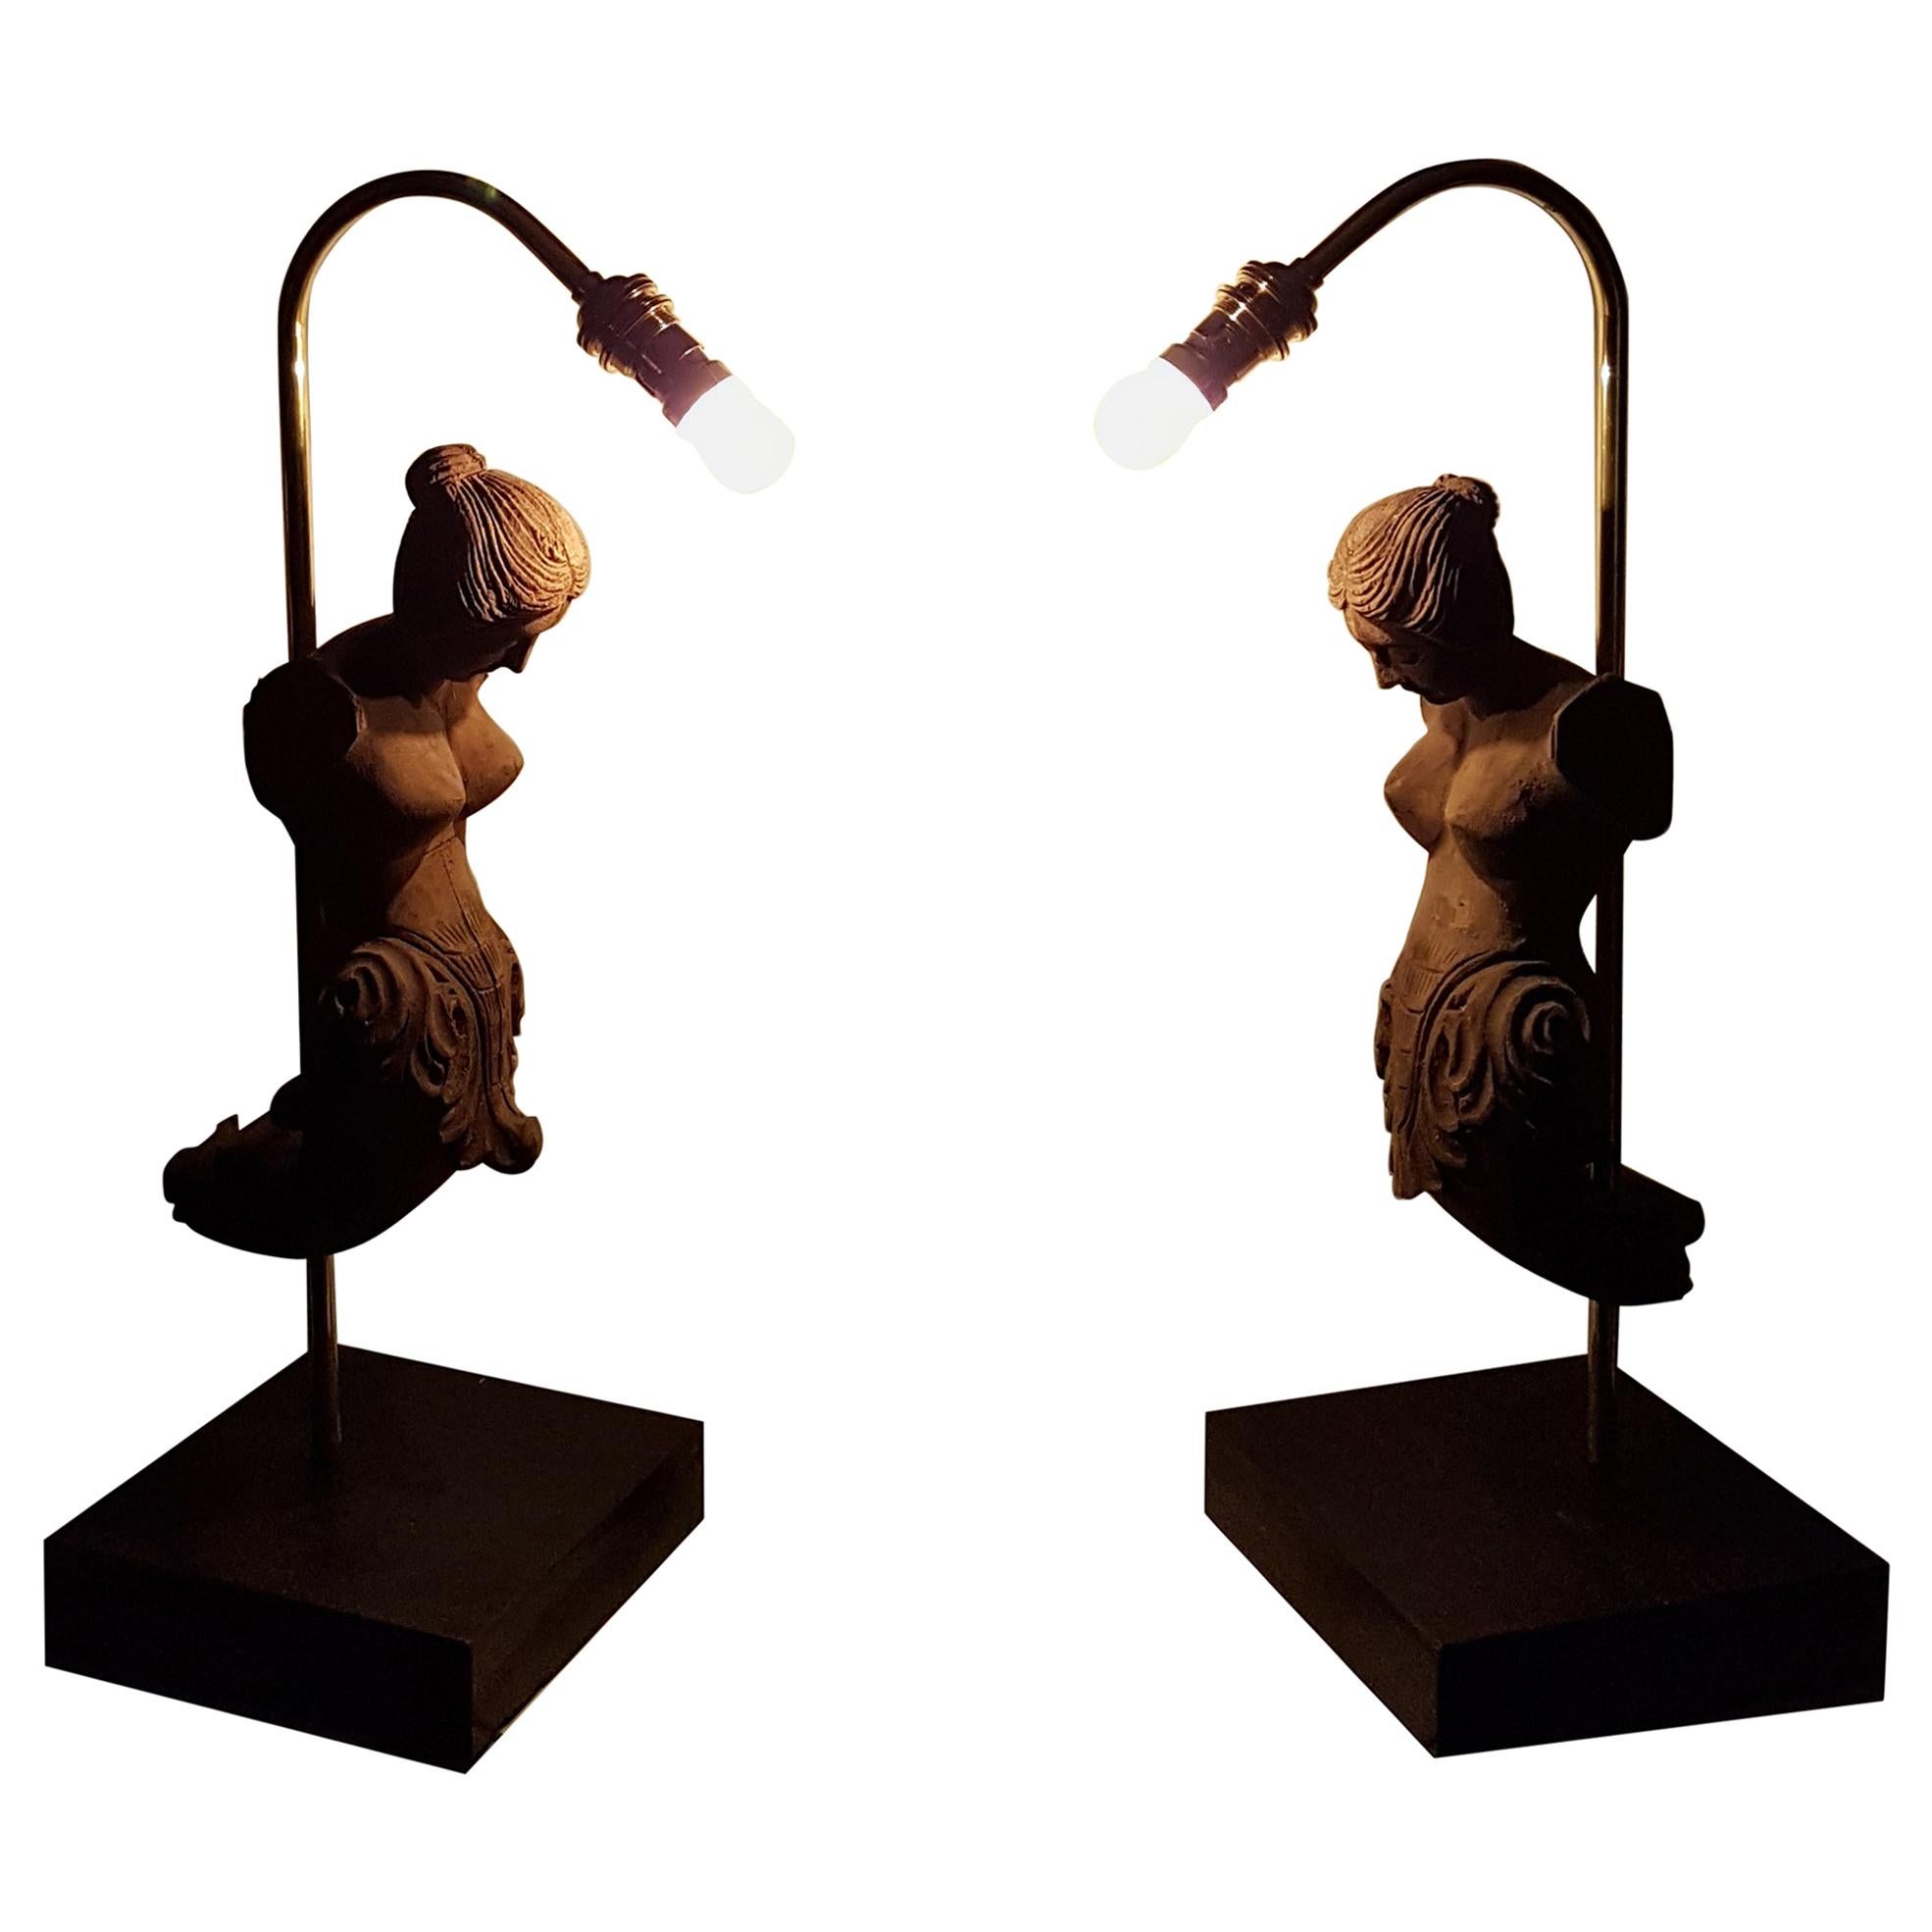 A nice decorative pair of table lamps constructed using old mid-20th century carved elements mold forms that depict female figures. There are minor losses to the carved figures that adds to their rustic appeal. These molds were used to take casting